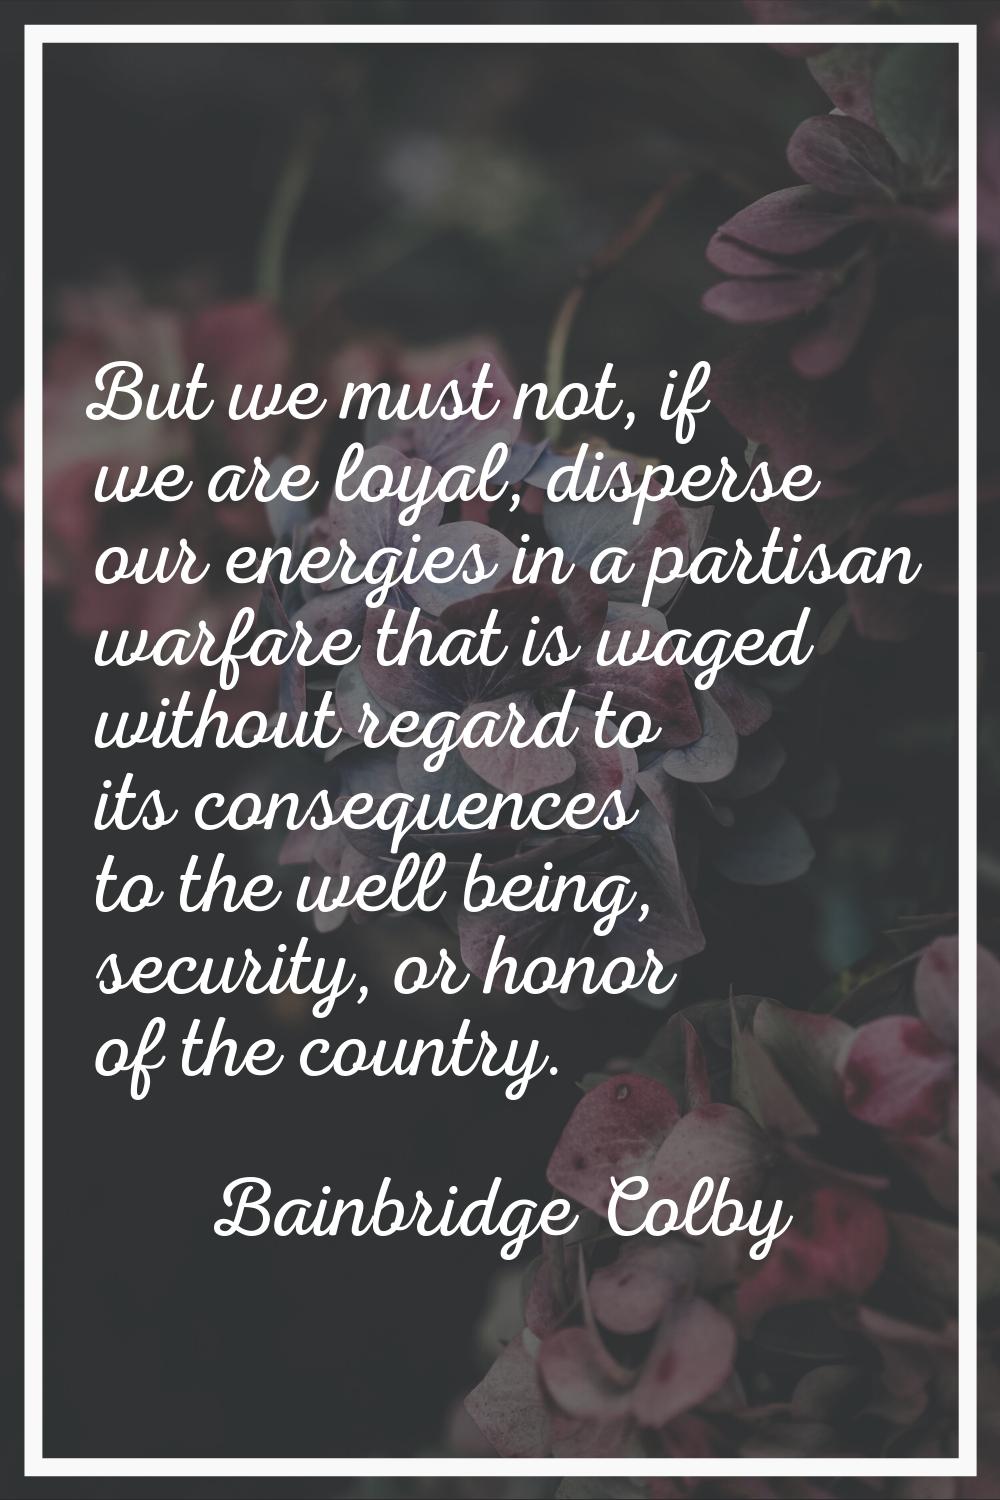 But we must not, if we are loyal, disperse our energies in a partisan warfare that is waged without